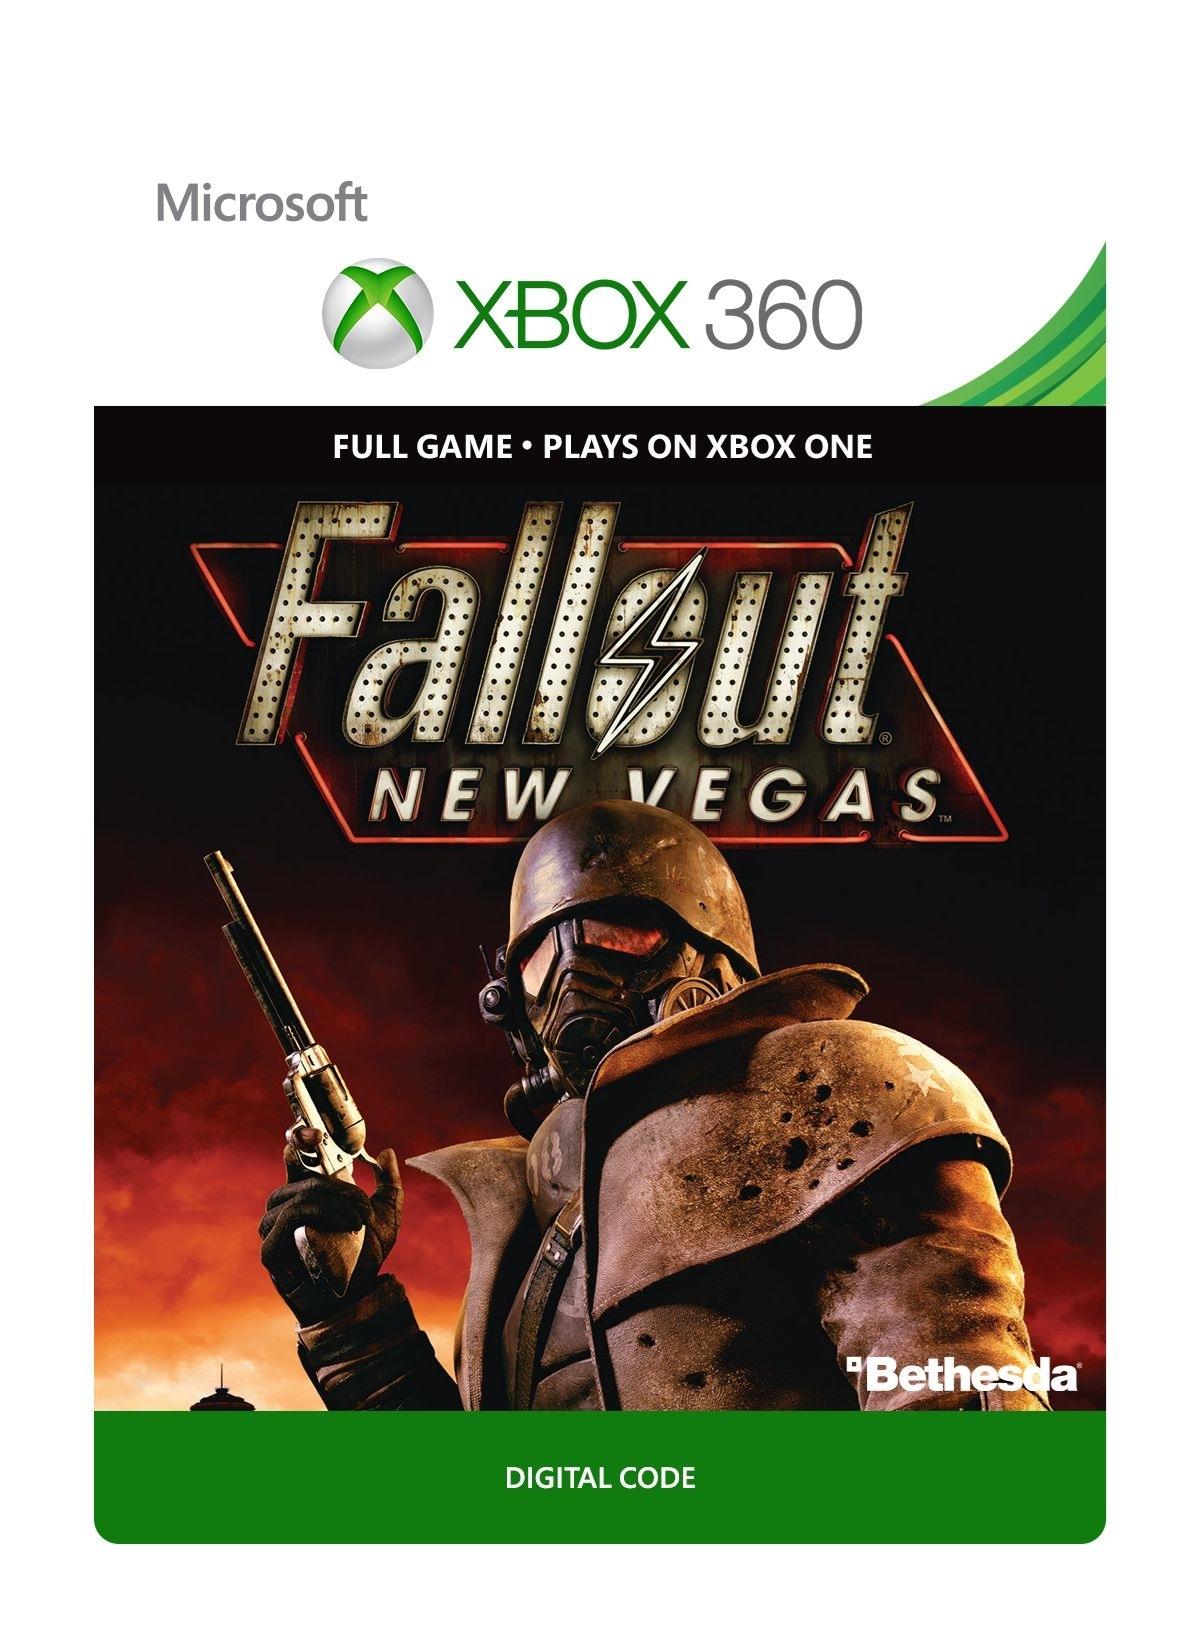 Fallout: New Vegas - Xbox 360 - Plays on Xbox One - Full Game | G3P-00097 (134fcafd-6324-43f0-ab65-baae27c8afc8)